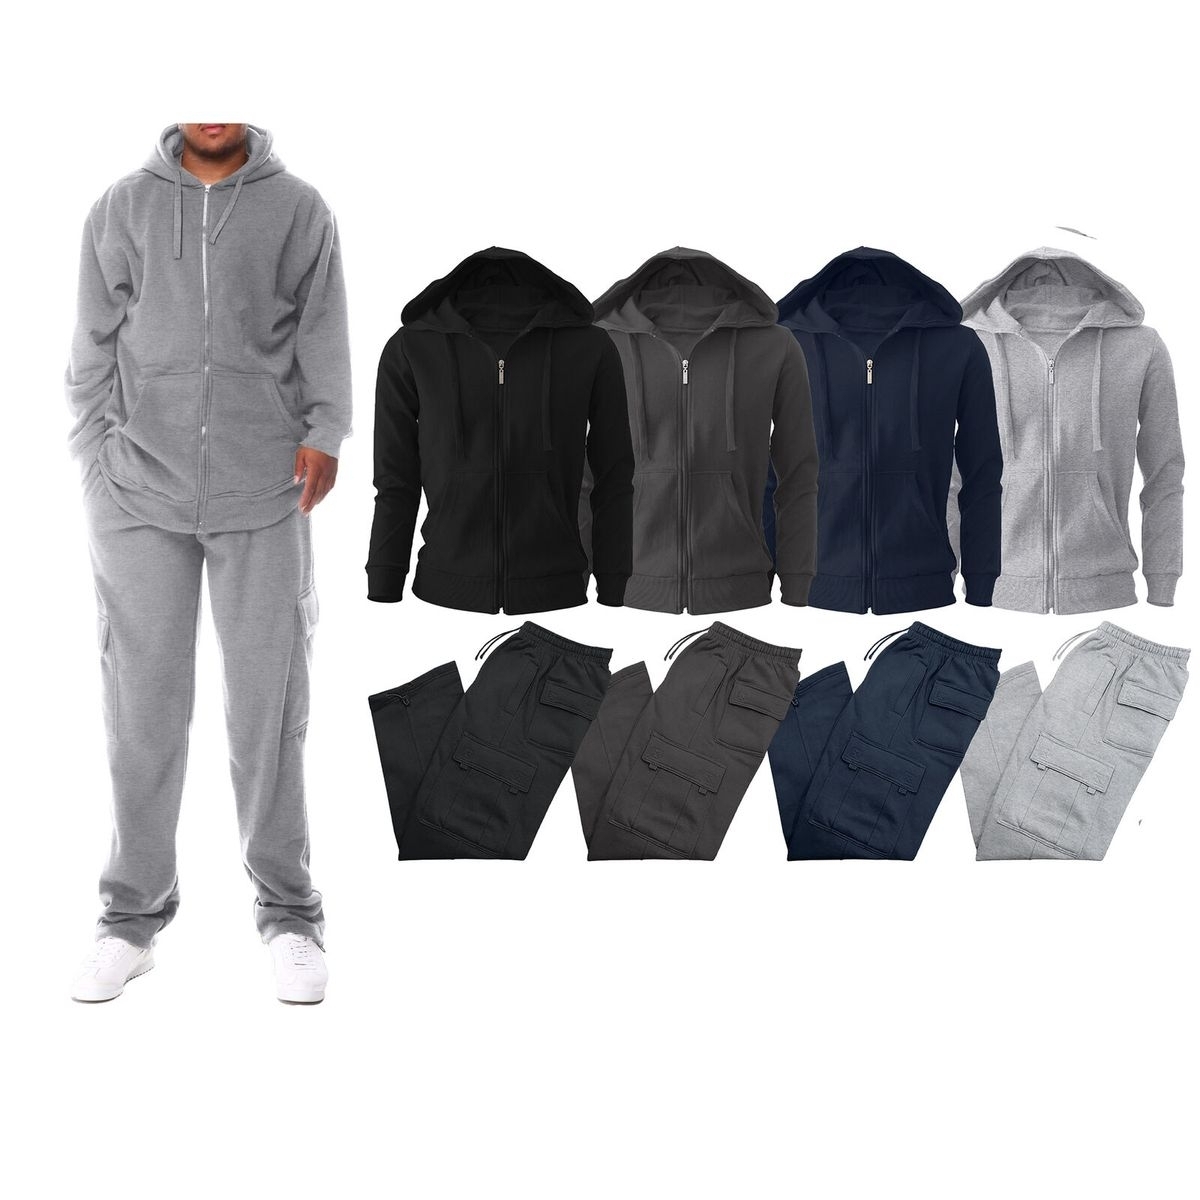 Men's Big & Tall Winter Warm Athletic Active Cozy Fleece Lined Multi-Pocket Full Zip Up Cargo Tracksuit - Grey, Small